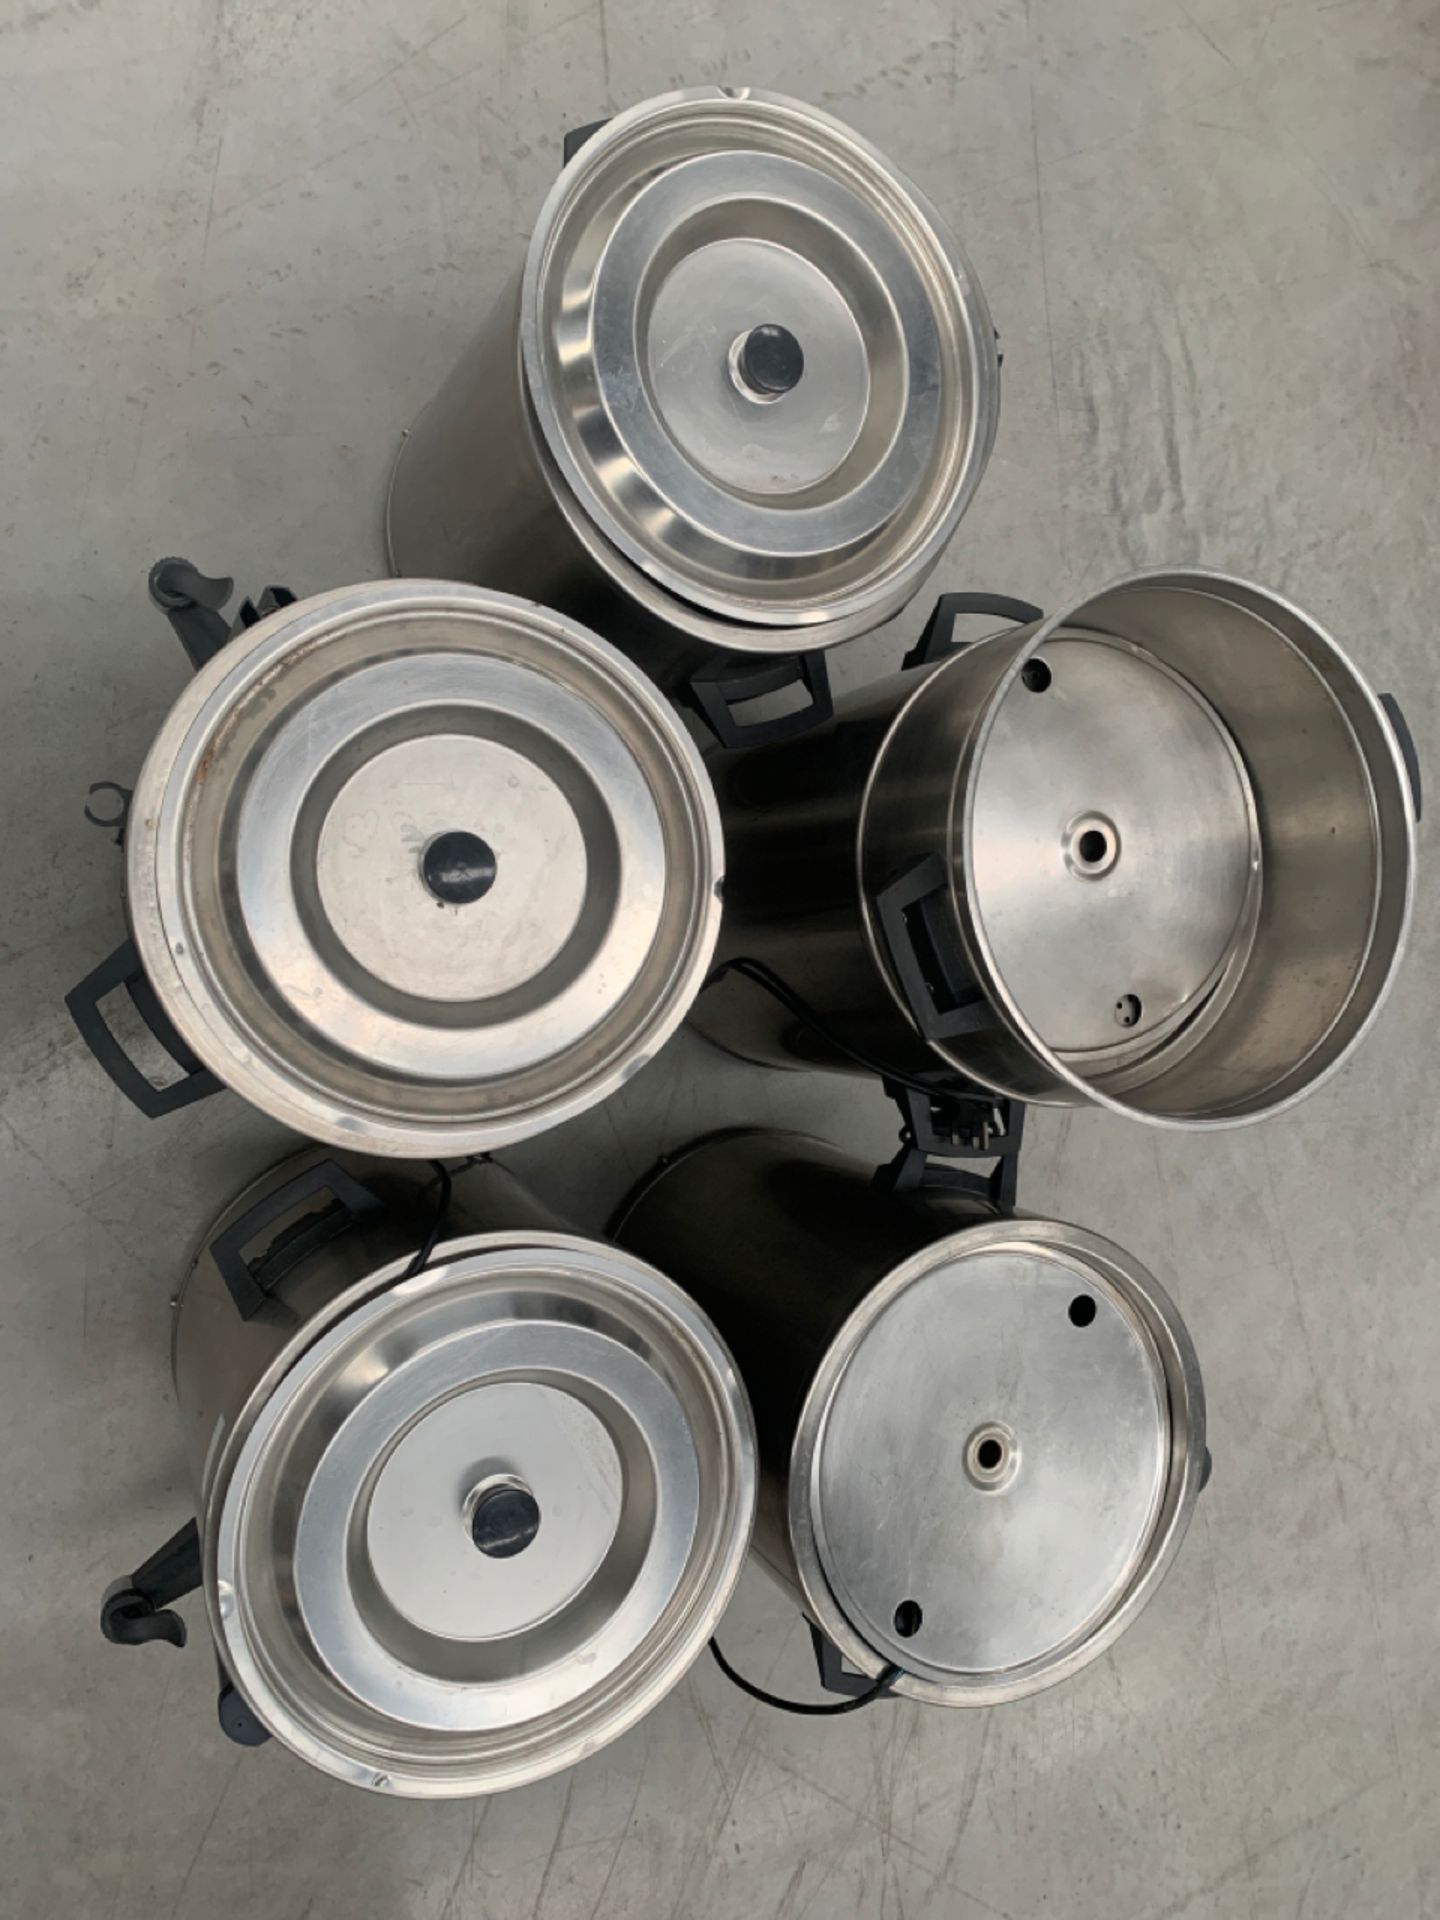 Set of 5 Stainless Steel Thermostatically Controll - Image 5 of 5